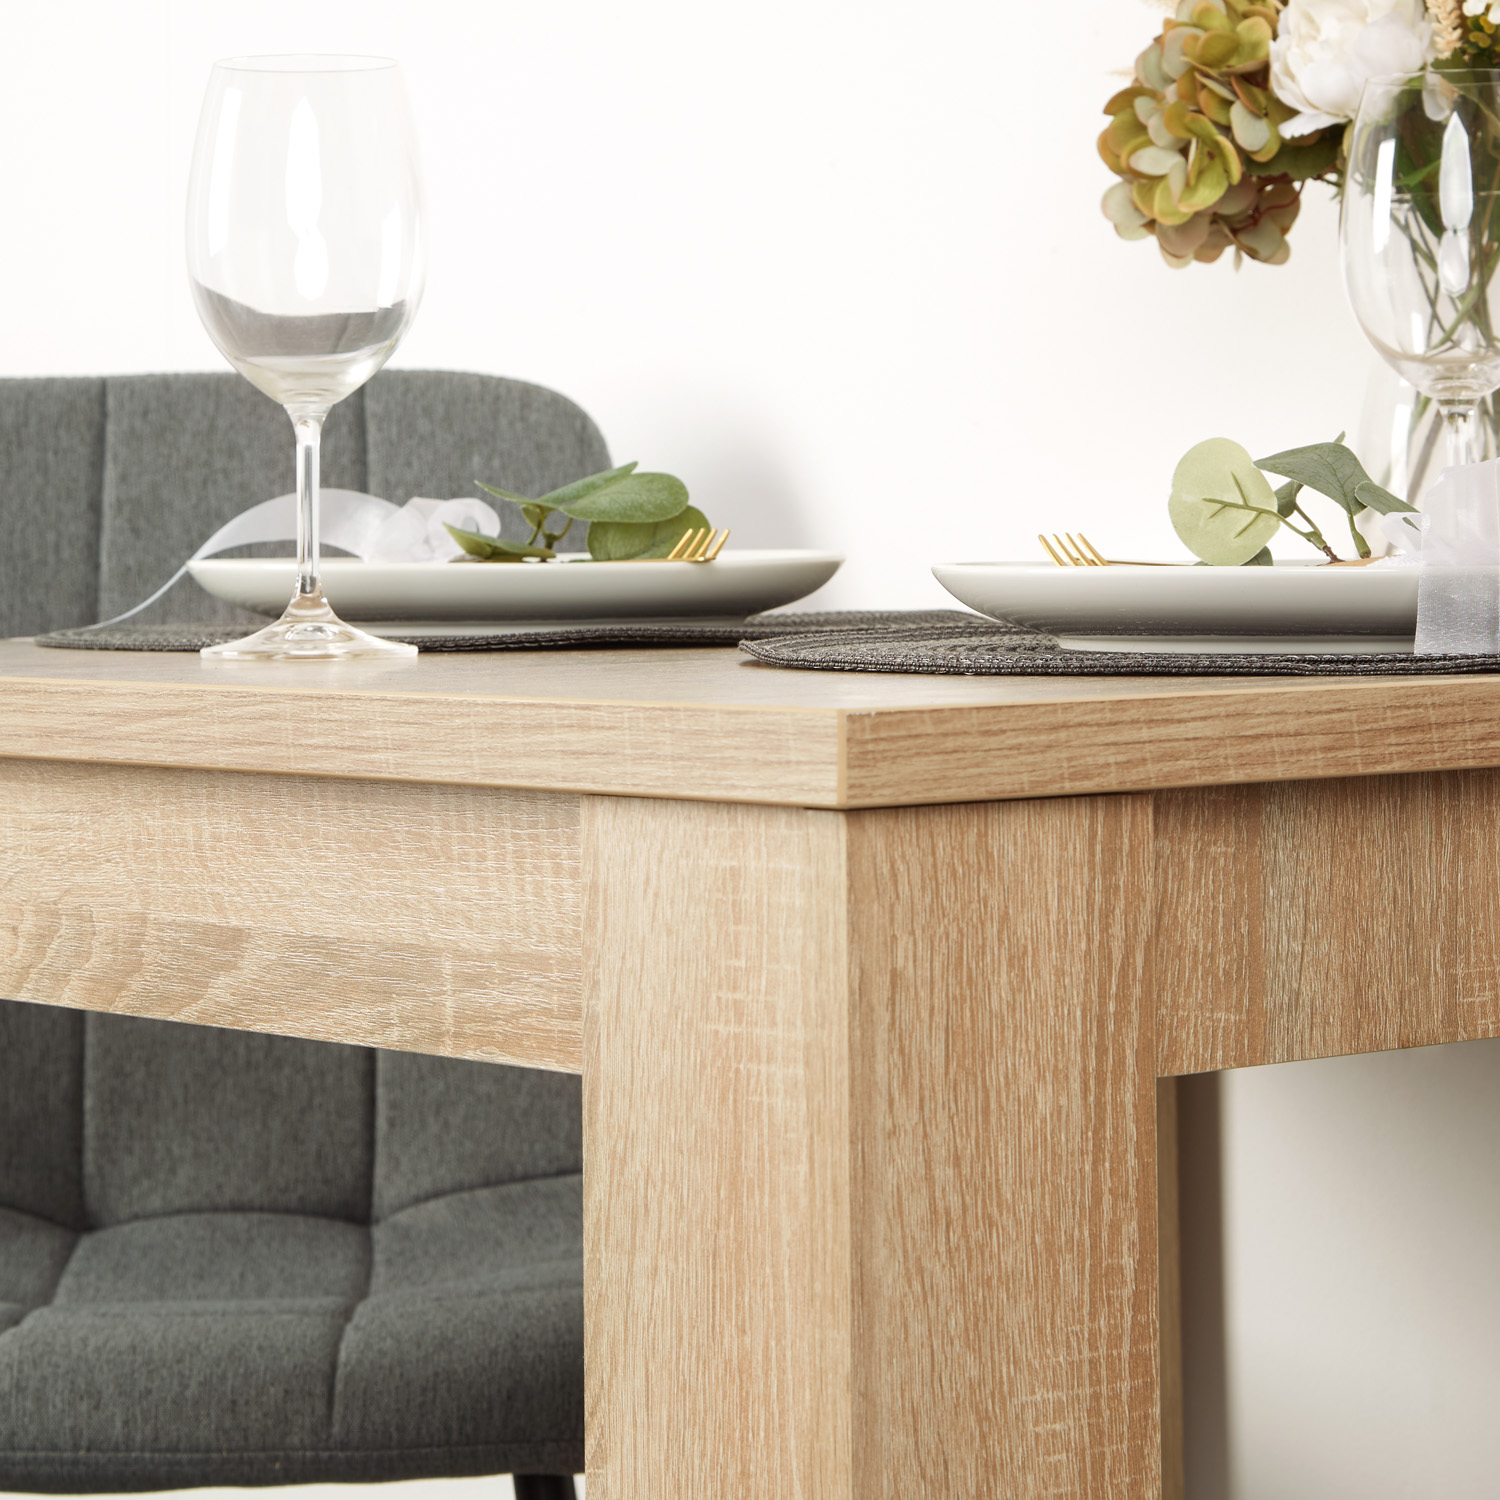 Modern Dining Table Sonoma Oak 80x80 cm with 2 Grey Linen Chairs Dining Room Table Natural Wooden Table